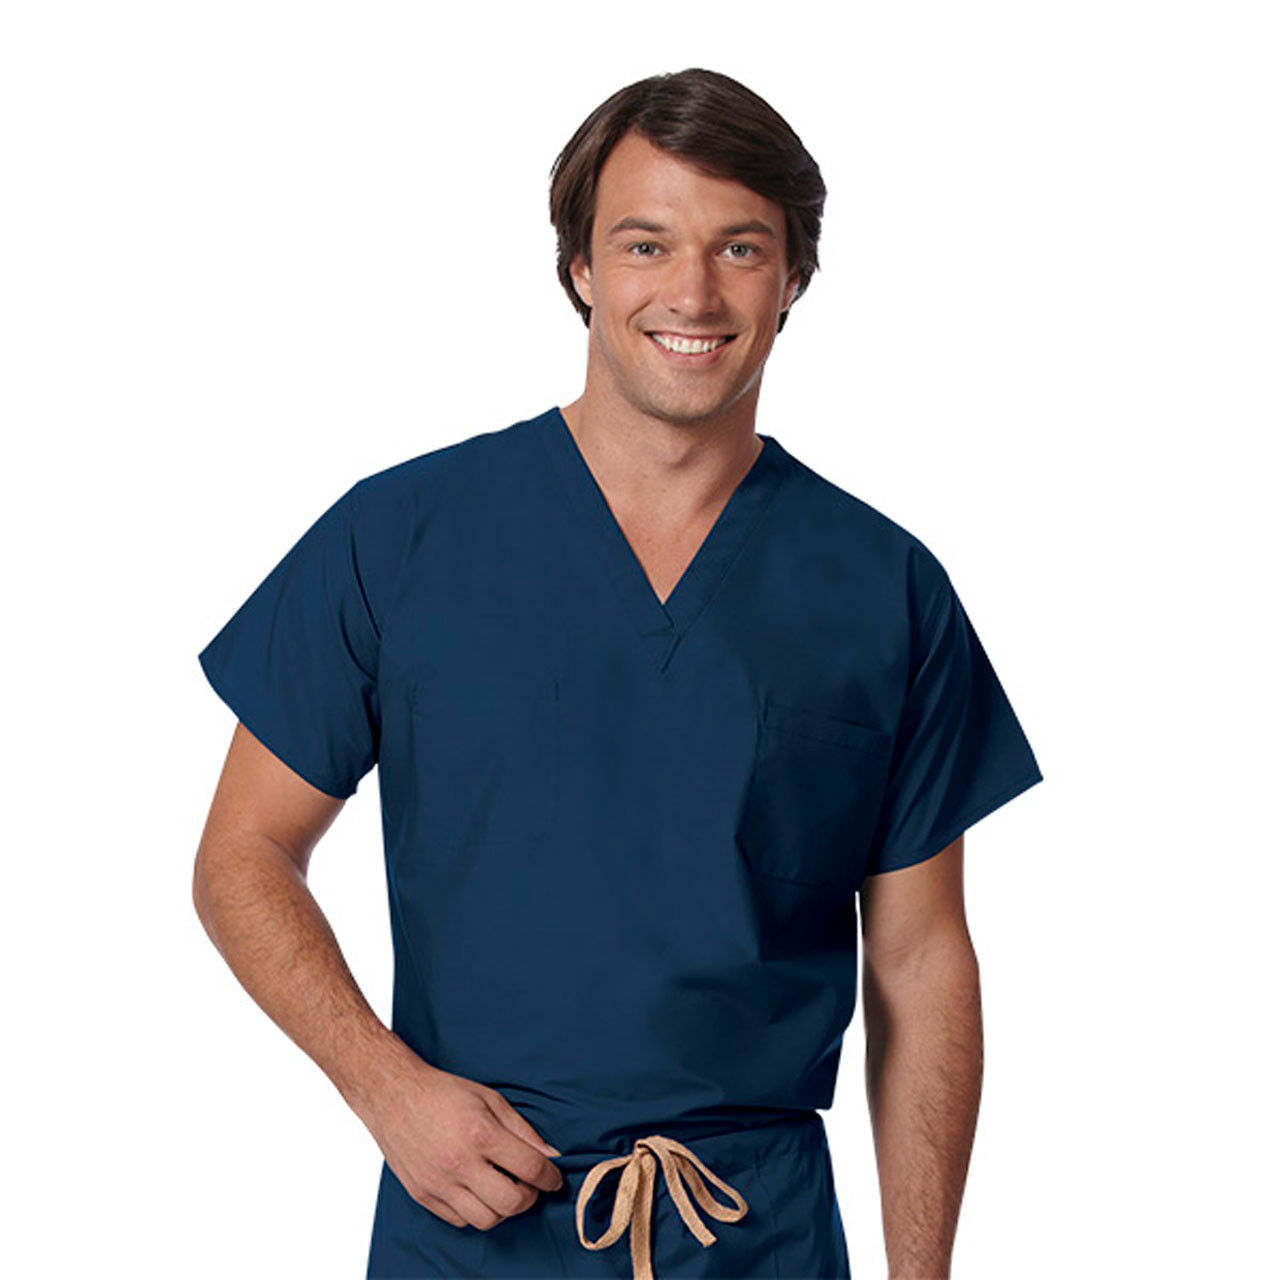 Do the navy surgical scrubs have any special sleeve design features?